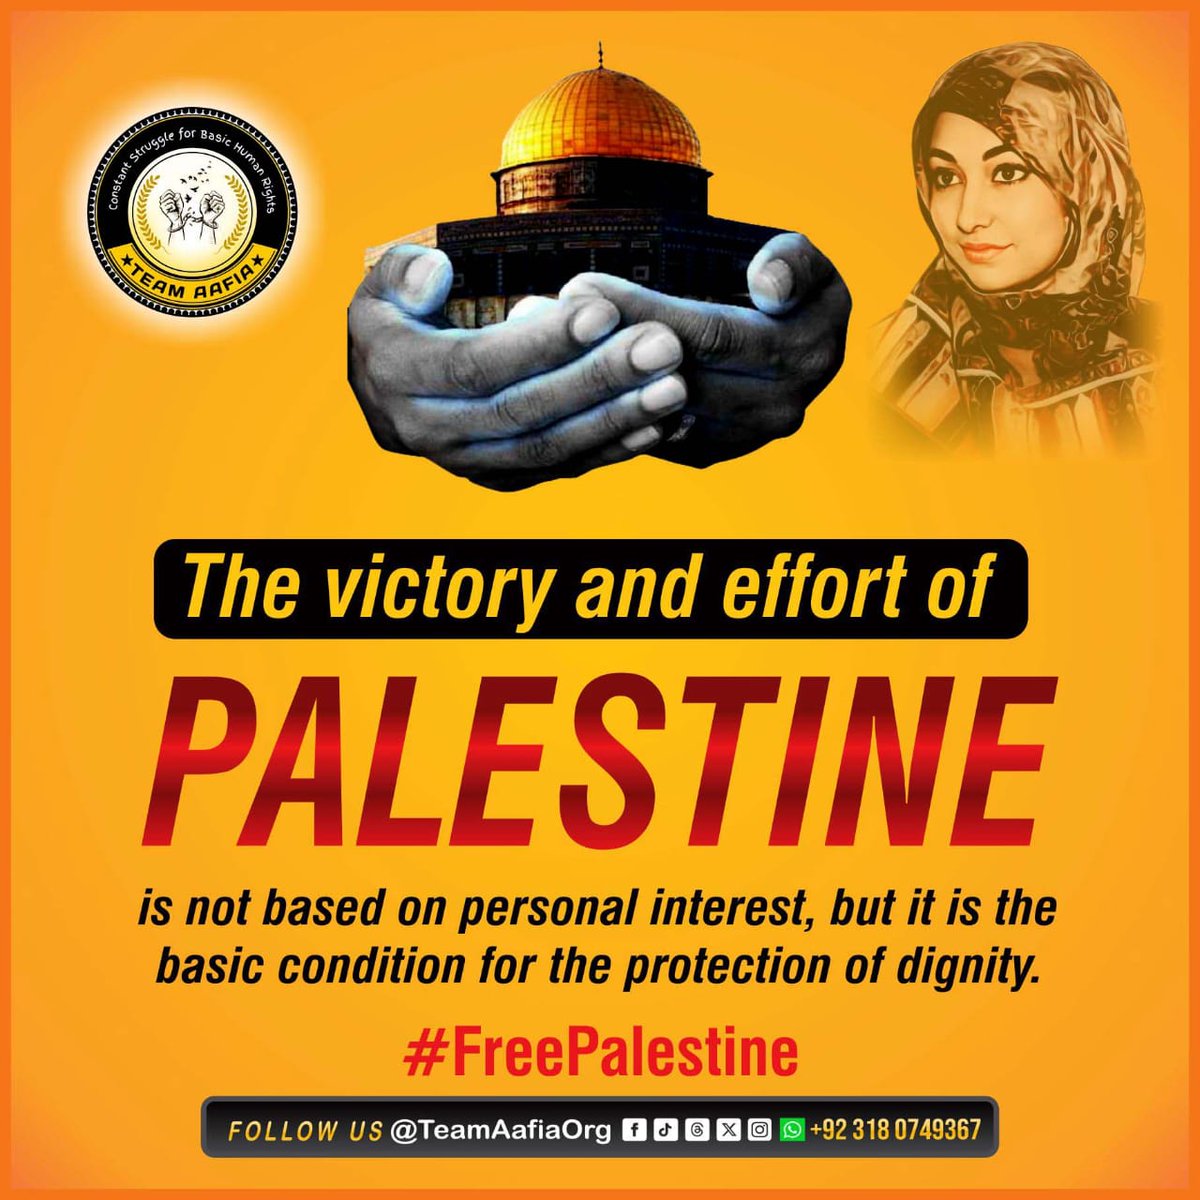 This is clearly demonstrated by the difficulty of securing the establishment of a state for the Palestinian people.
#Youth4Palestine
@TeamAafiaOrg_
@SaveGazaPK

#Youth4Palestine
537